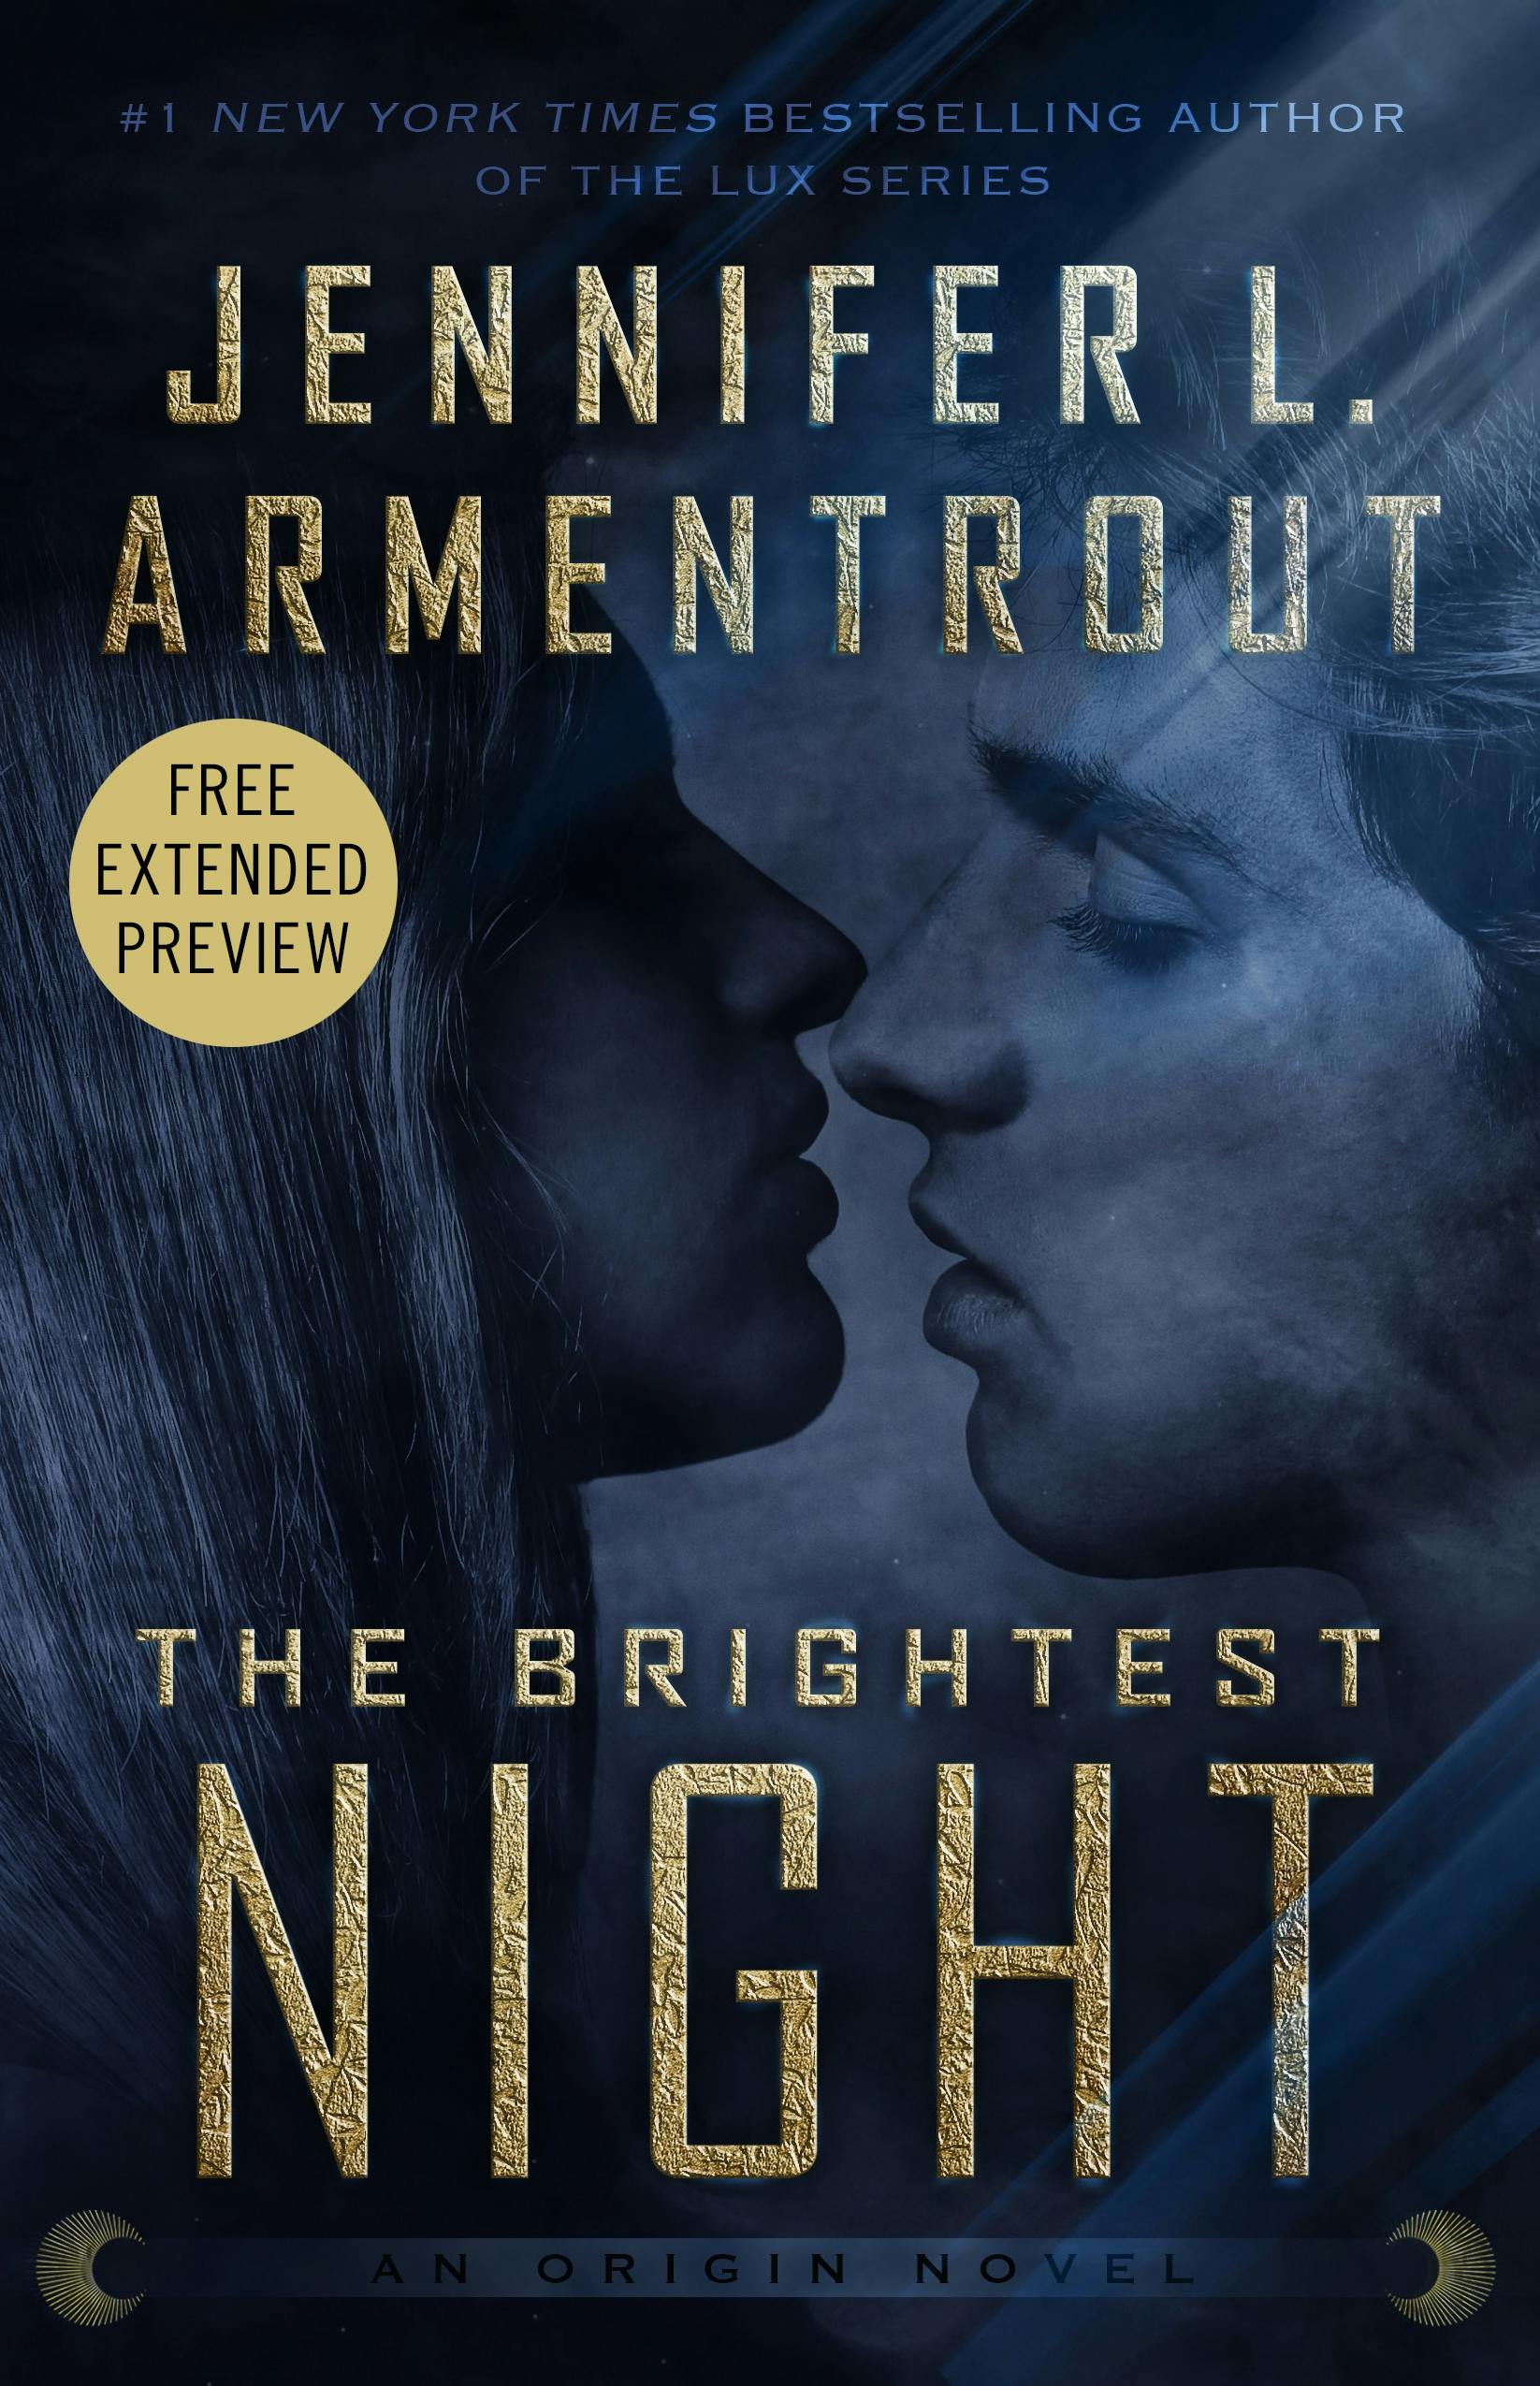 Cover for the book titled as: The Brightest Night Sneak Peek